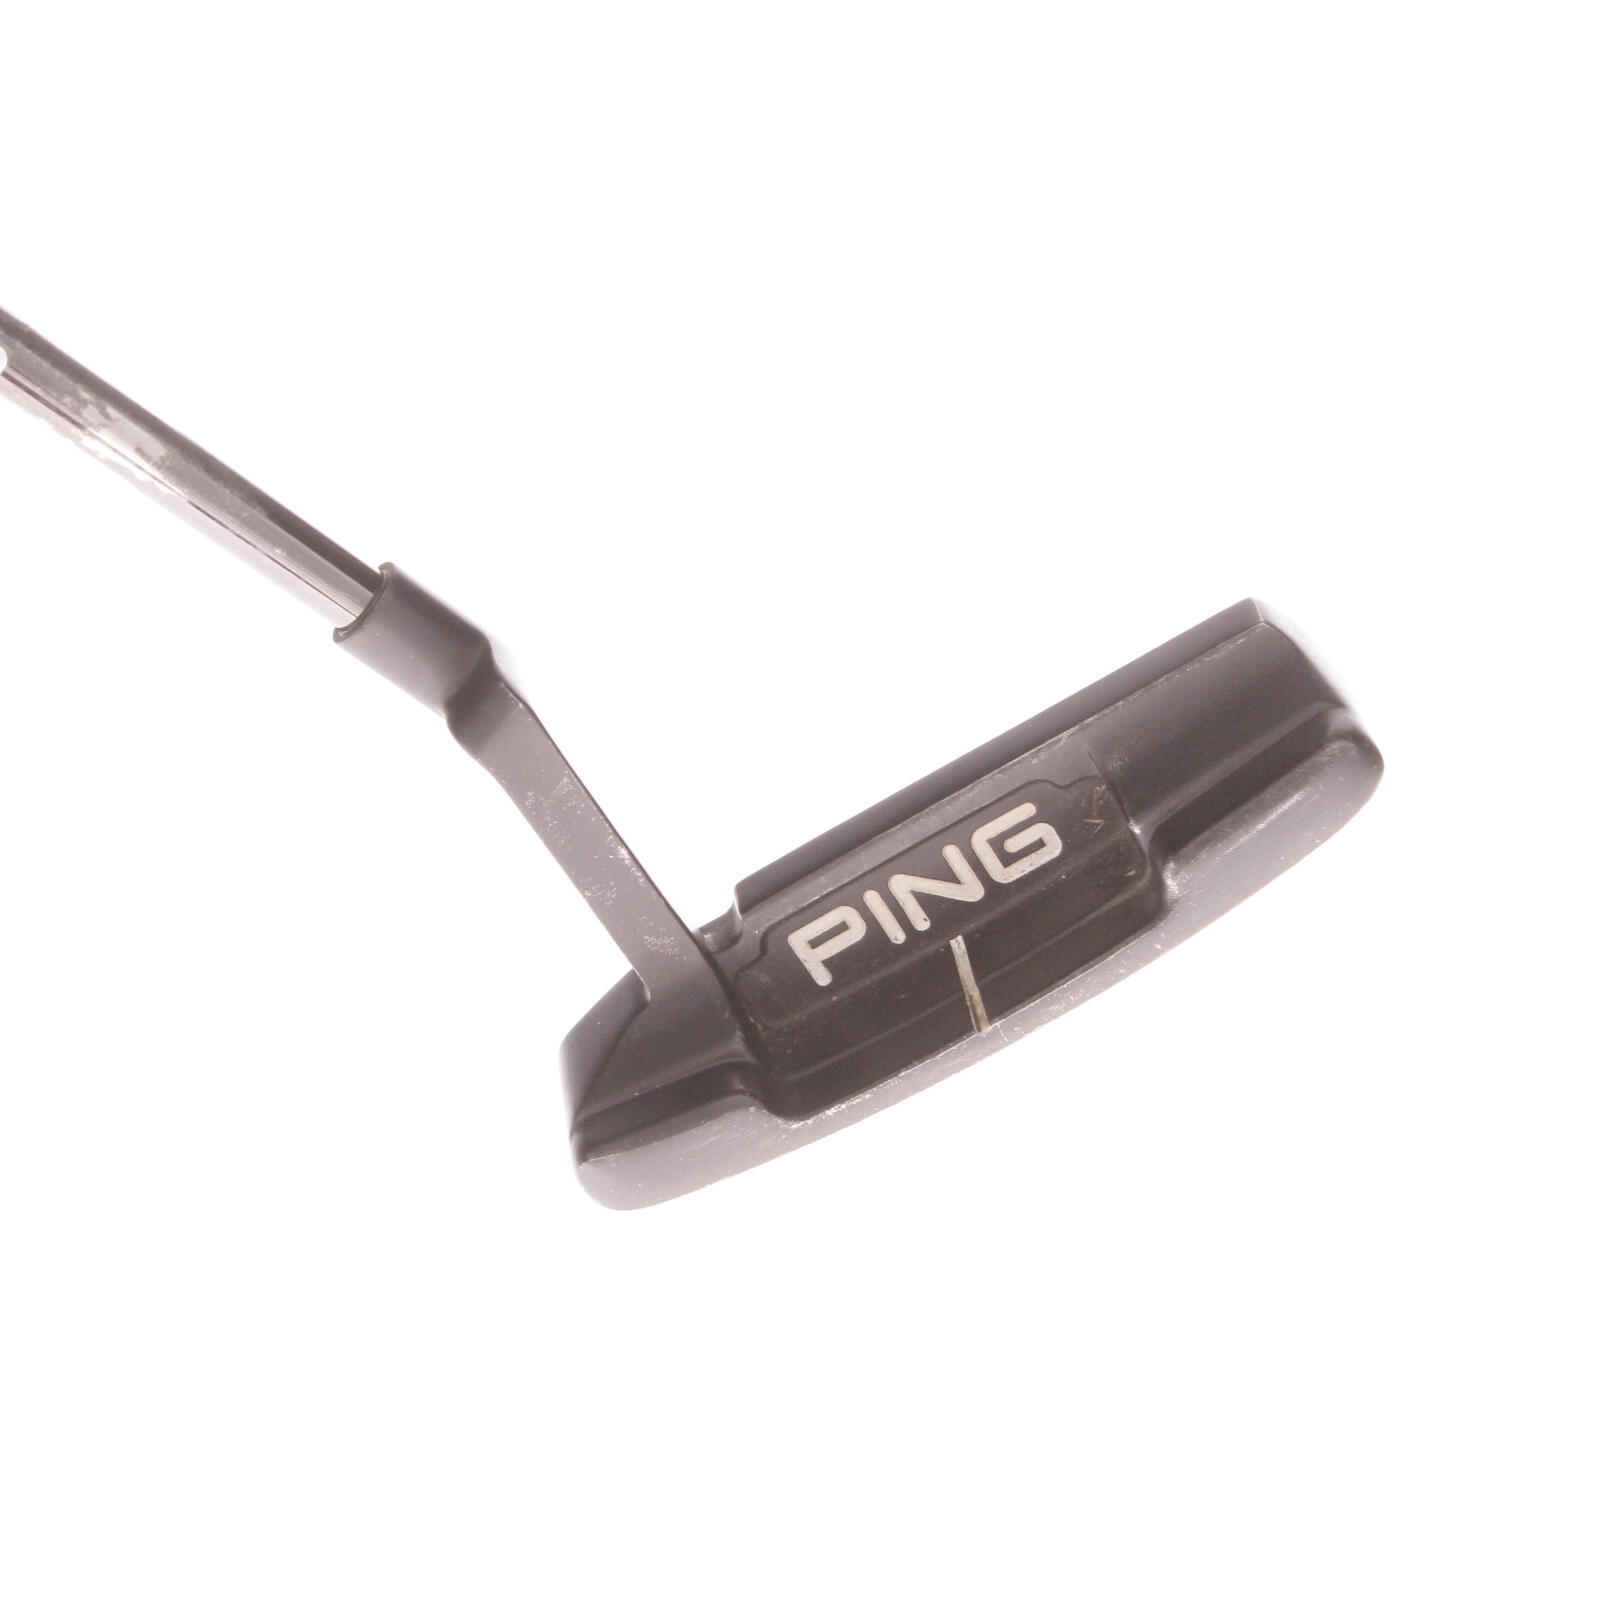 USED - Ping Anser 2 Putter 33 Inches Length Steel Shaft Right Handed - GRADE B 5/7